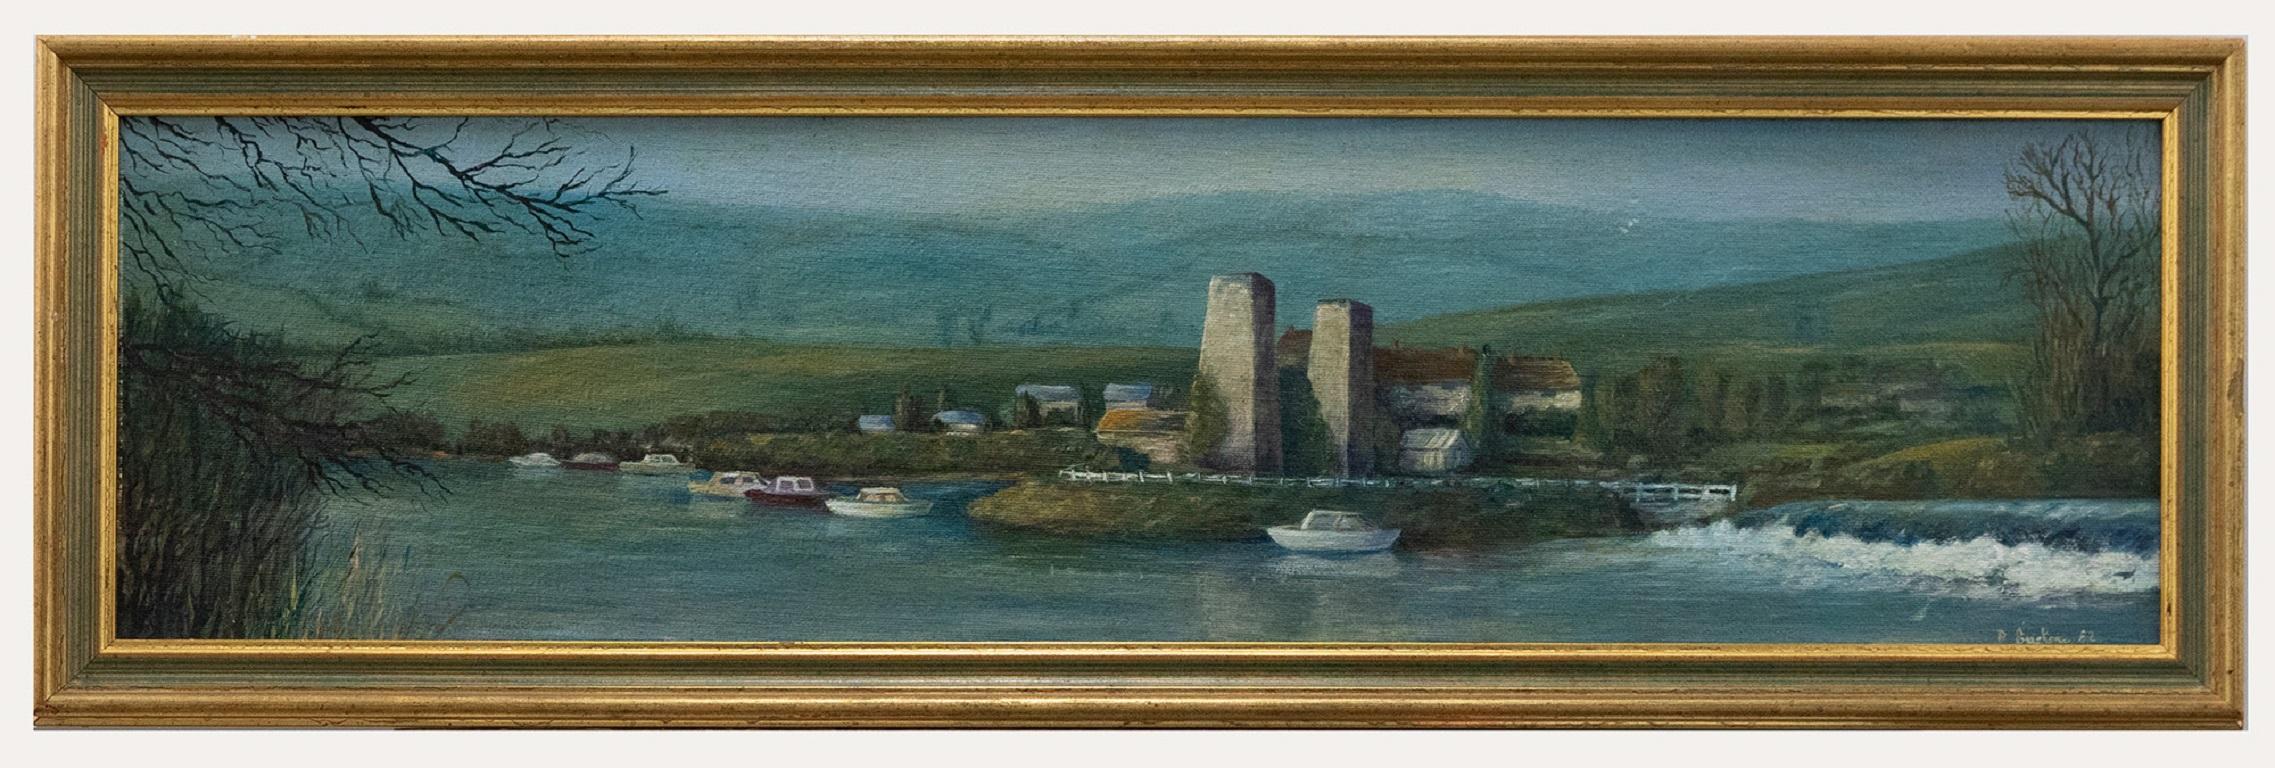 Unknown Landscape Painting - P. Burton - Framed 20th Century Oil, Across from the Jolley Sailor